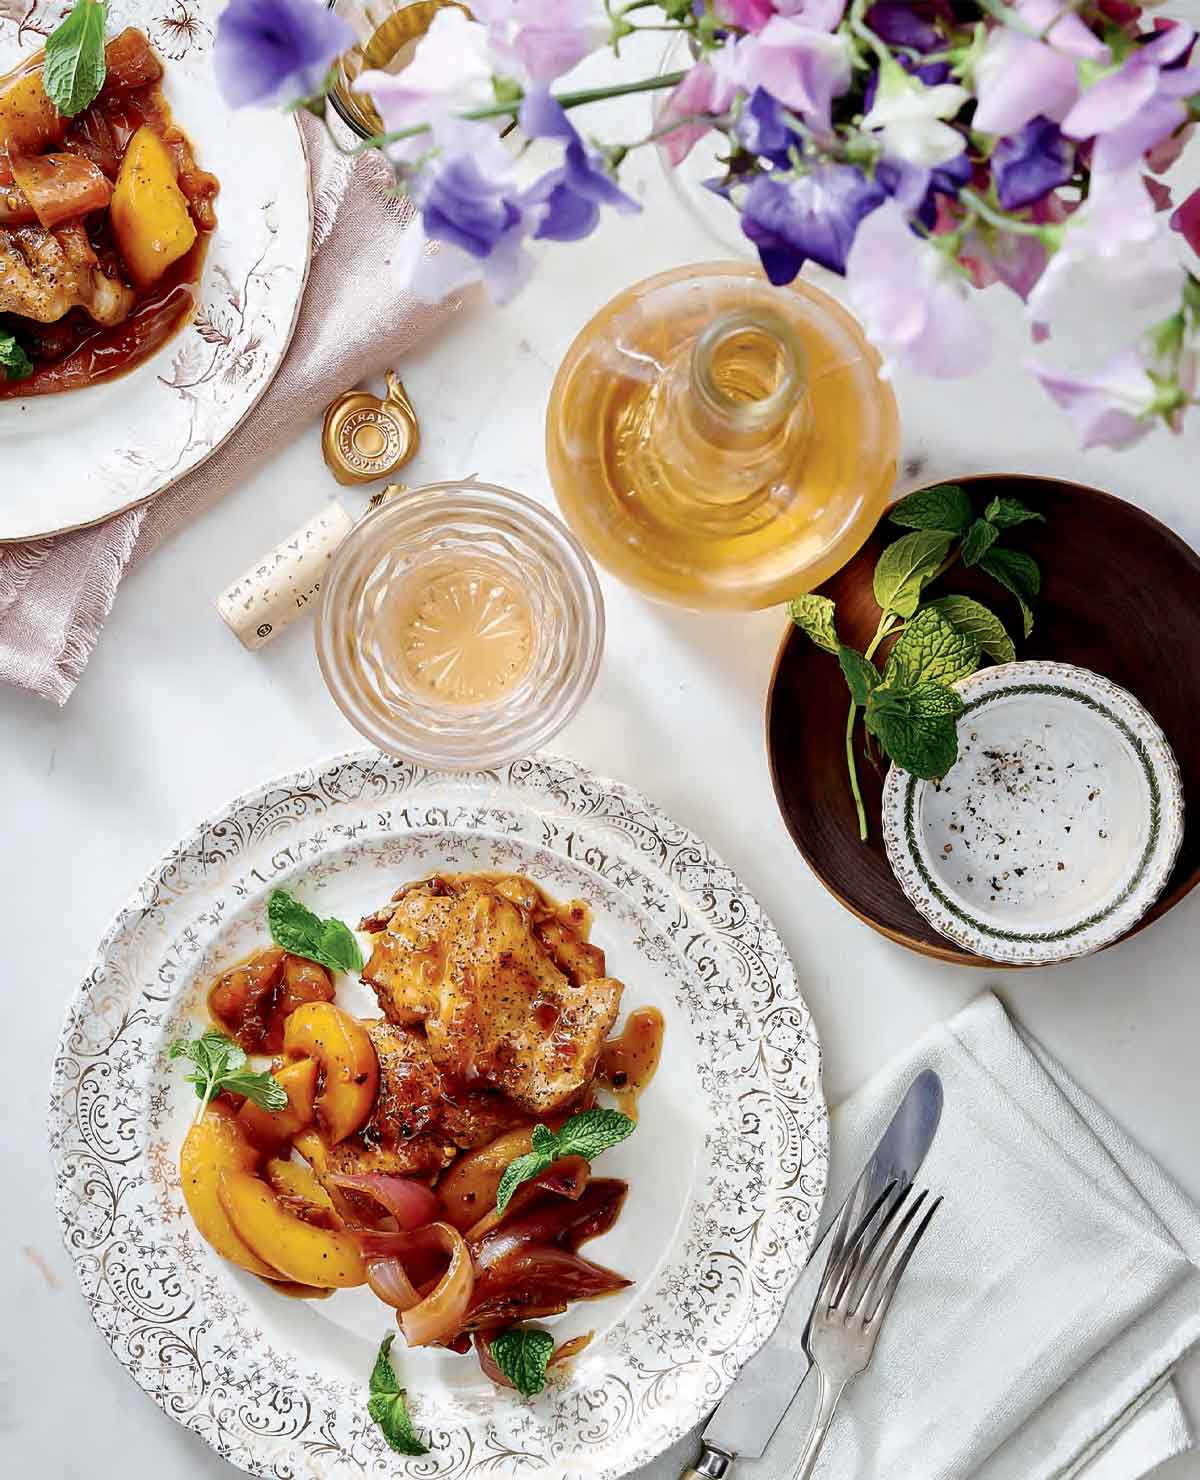 A patterned plate topped with chicken thighs with spicy peach sauce on a table with a bottle and glass of wine, flowers, cutlery, and a napkin.